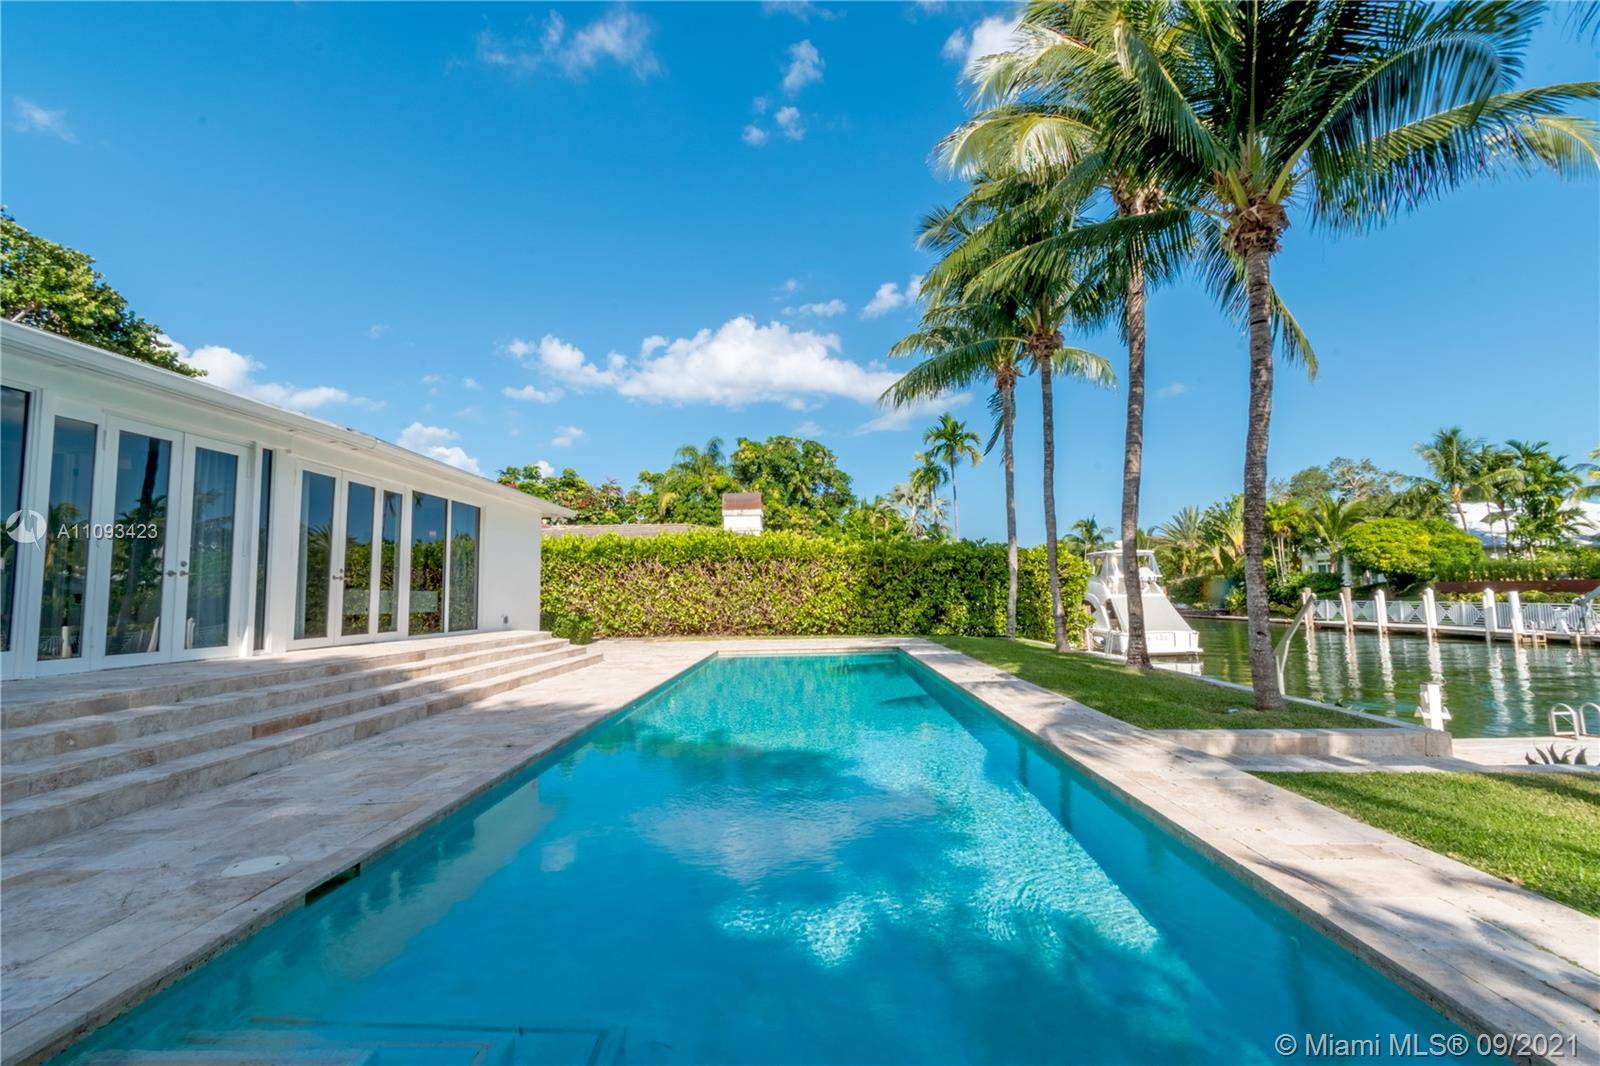 Stunning 3 bed 3 bath home COMPLETELY FURNISHED available in Bay Point, an exclusive, gated community in the heart of Miami.